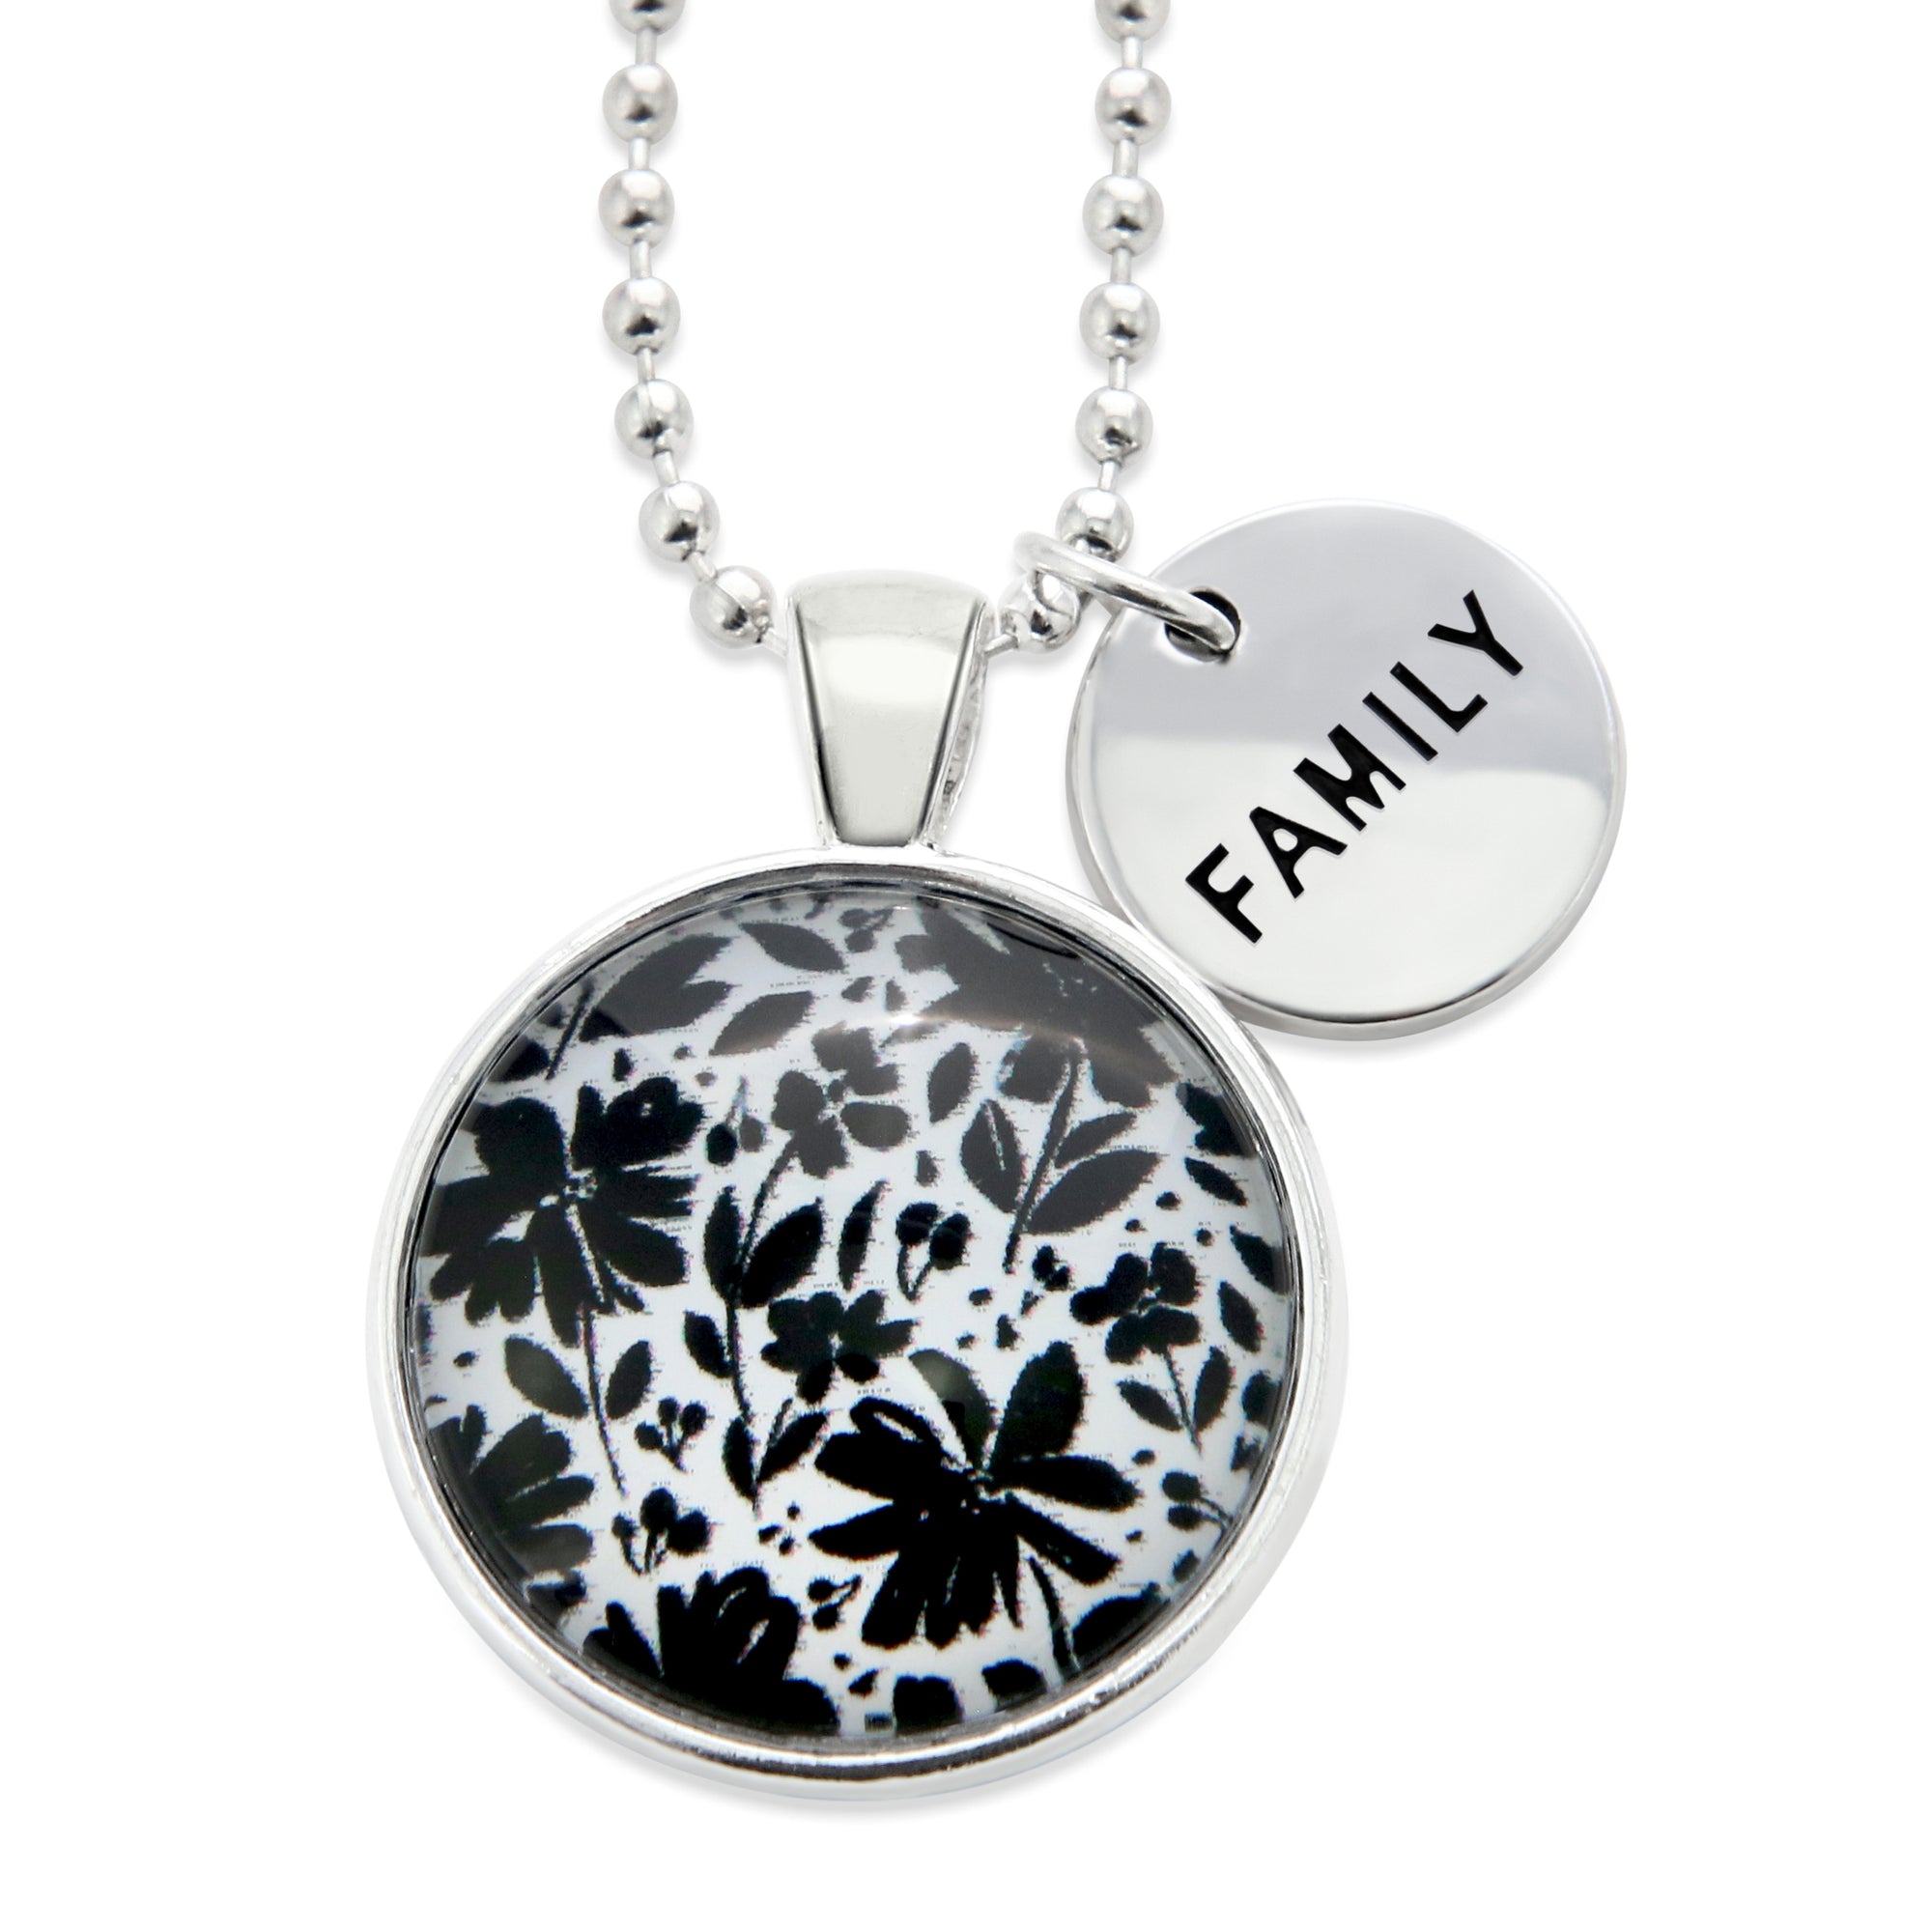 Black & White Collection - Bright Silver 'FAMILY' Necklace - Inky Buds (10812)